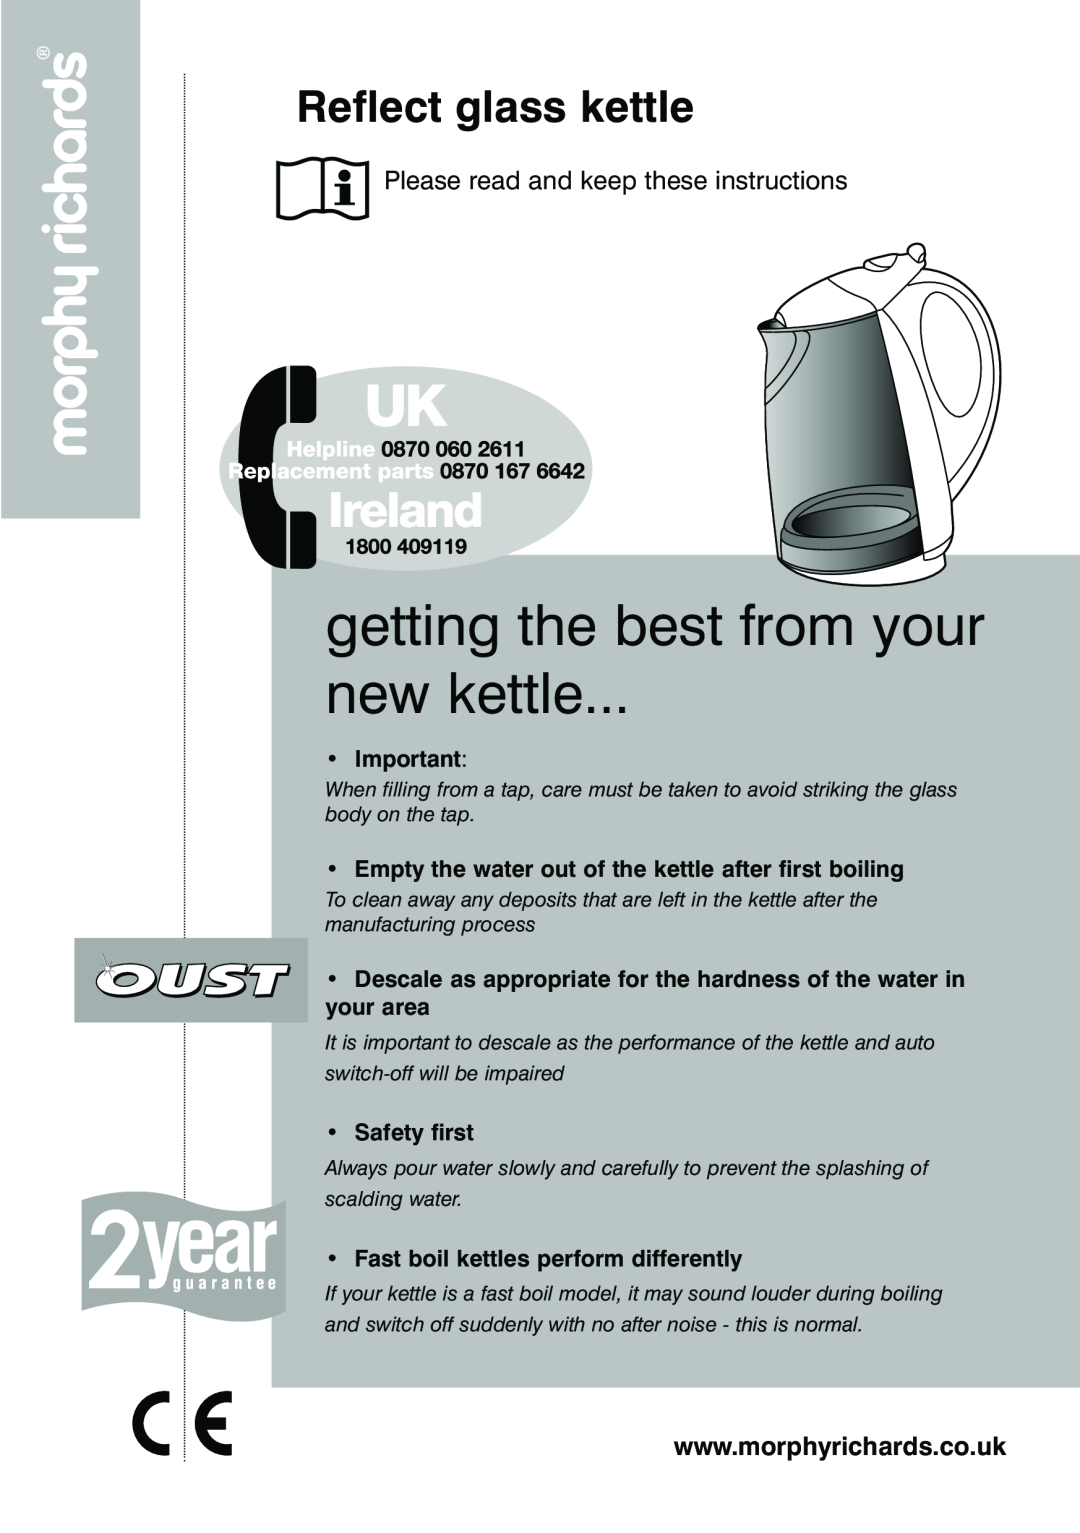 Morphy Richards Reflect glass kettle manual Empty the water out of the kettle after first boiling, Safety first 